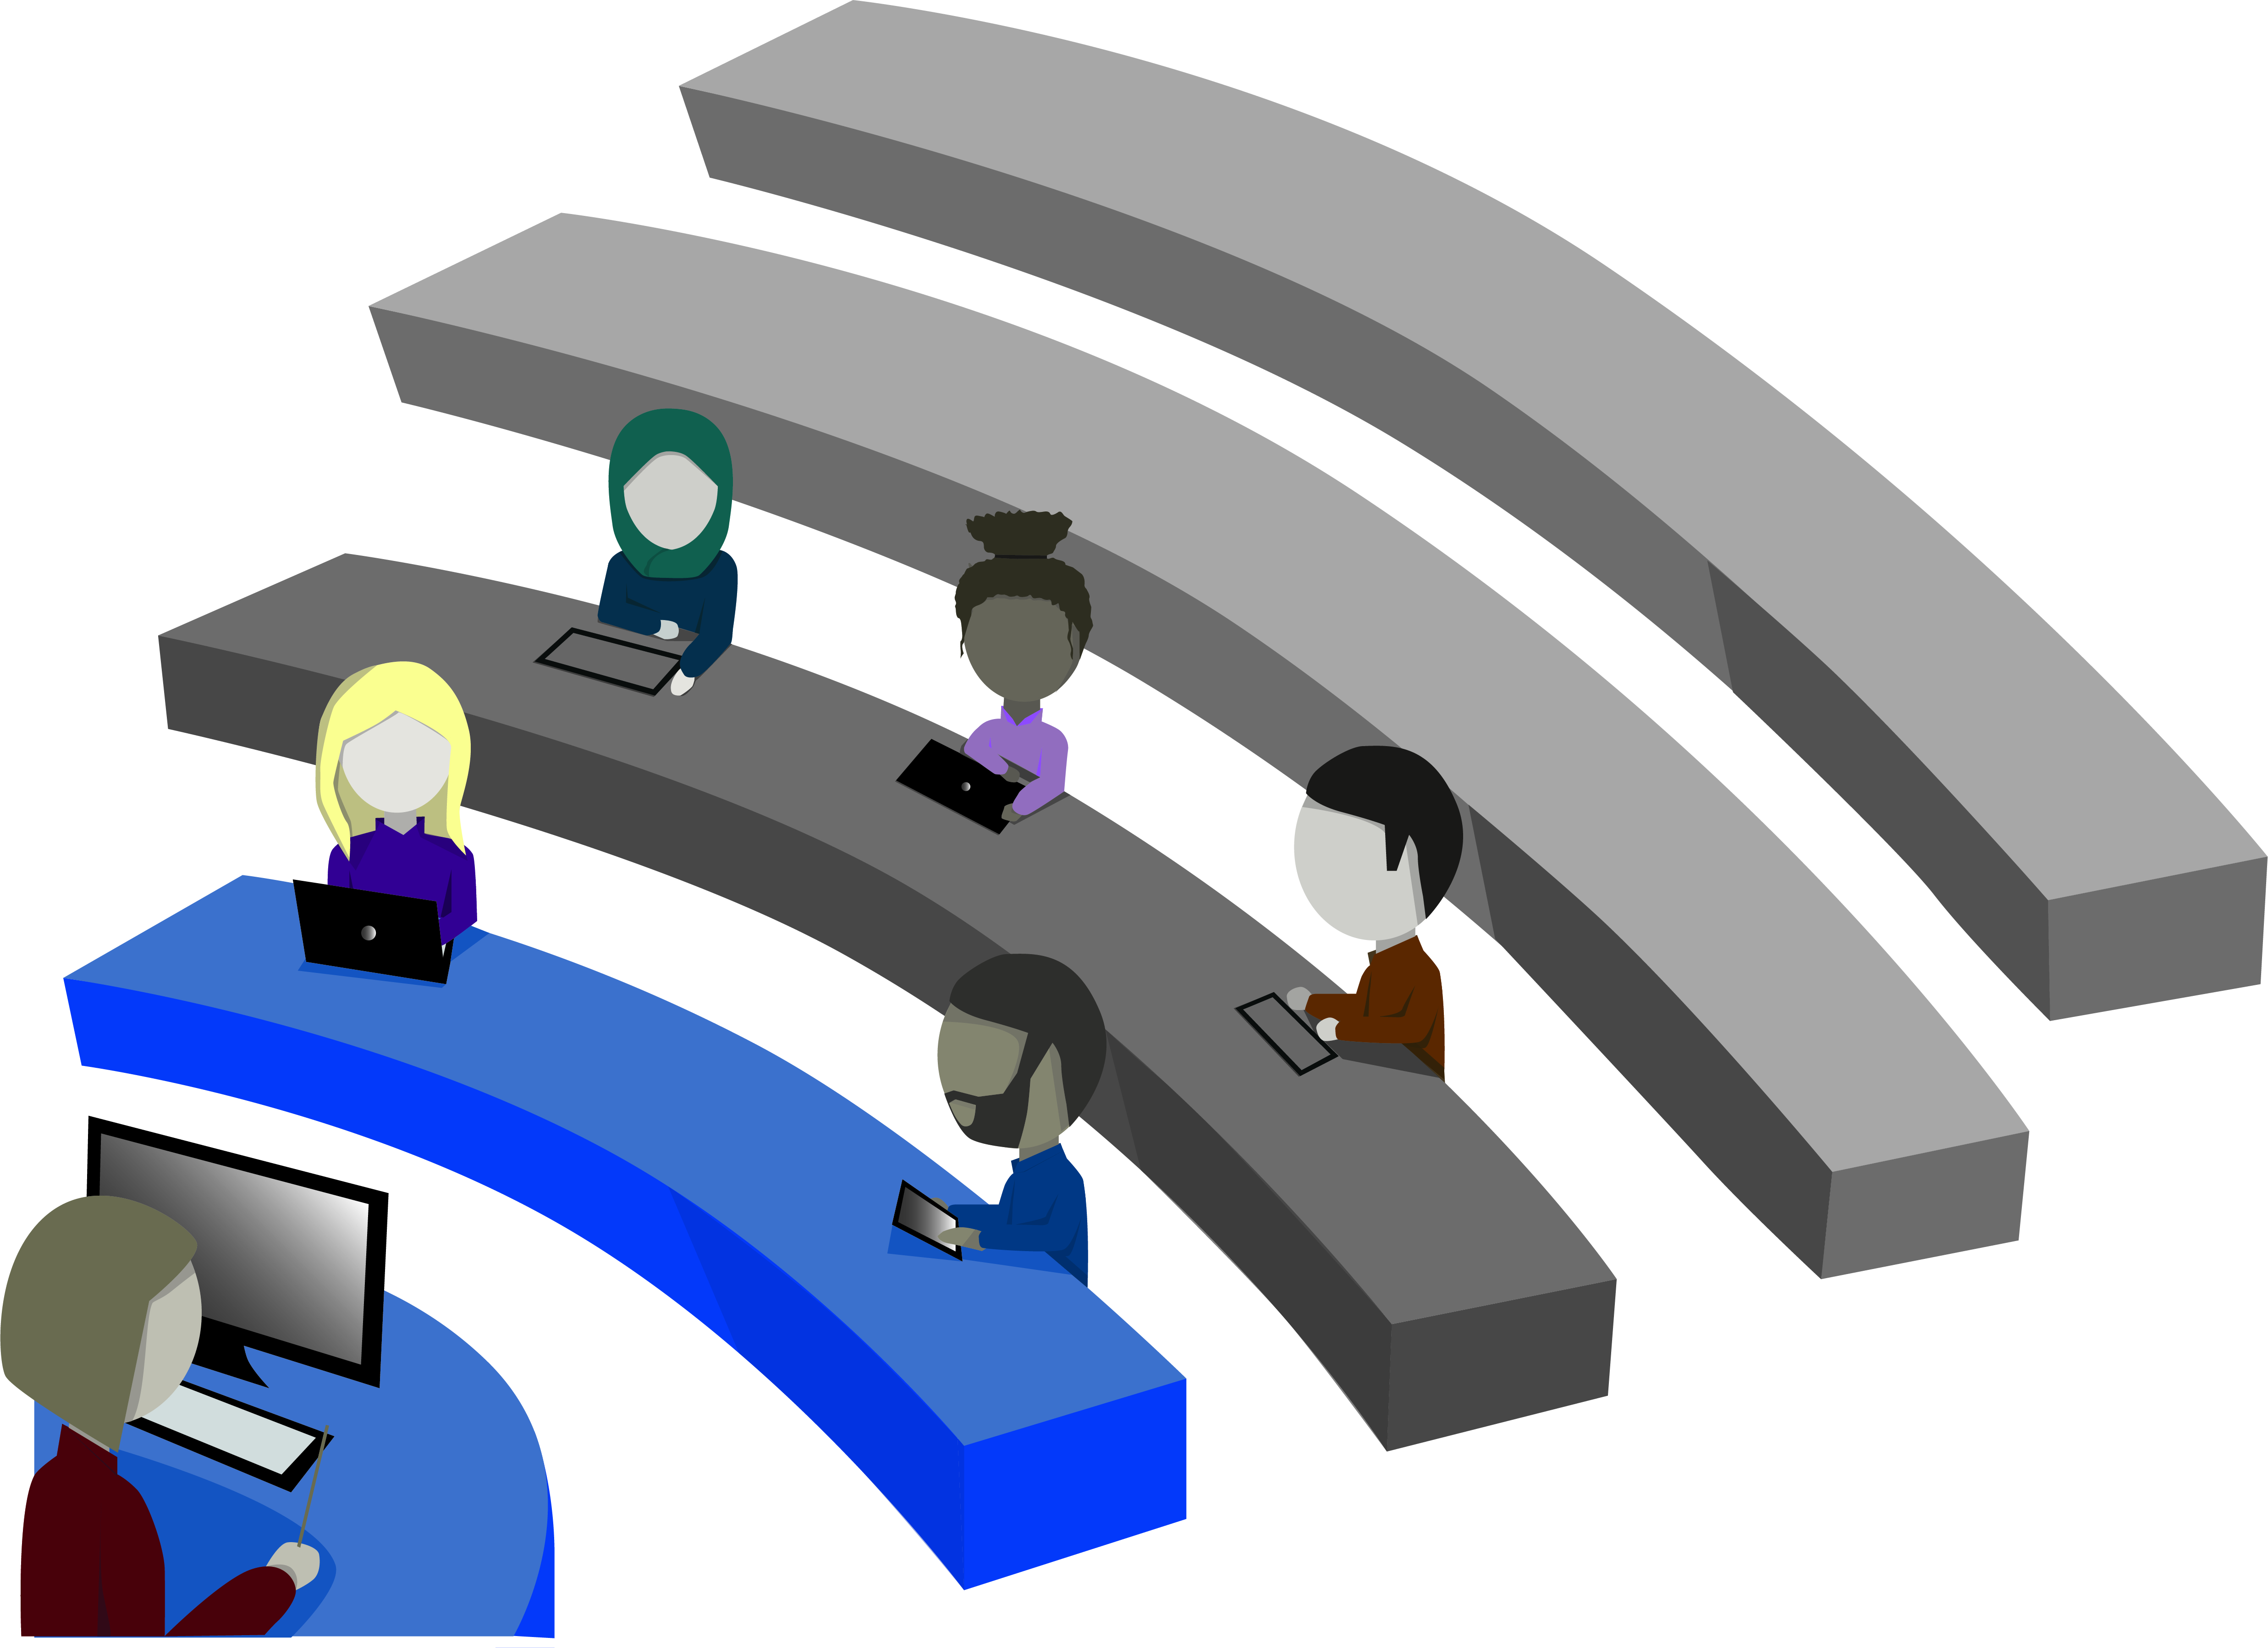 Graphic illustration of students in lecture hall with laptops by Zainab Saleh